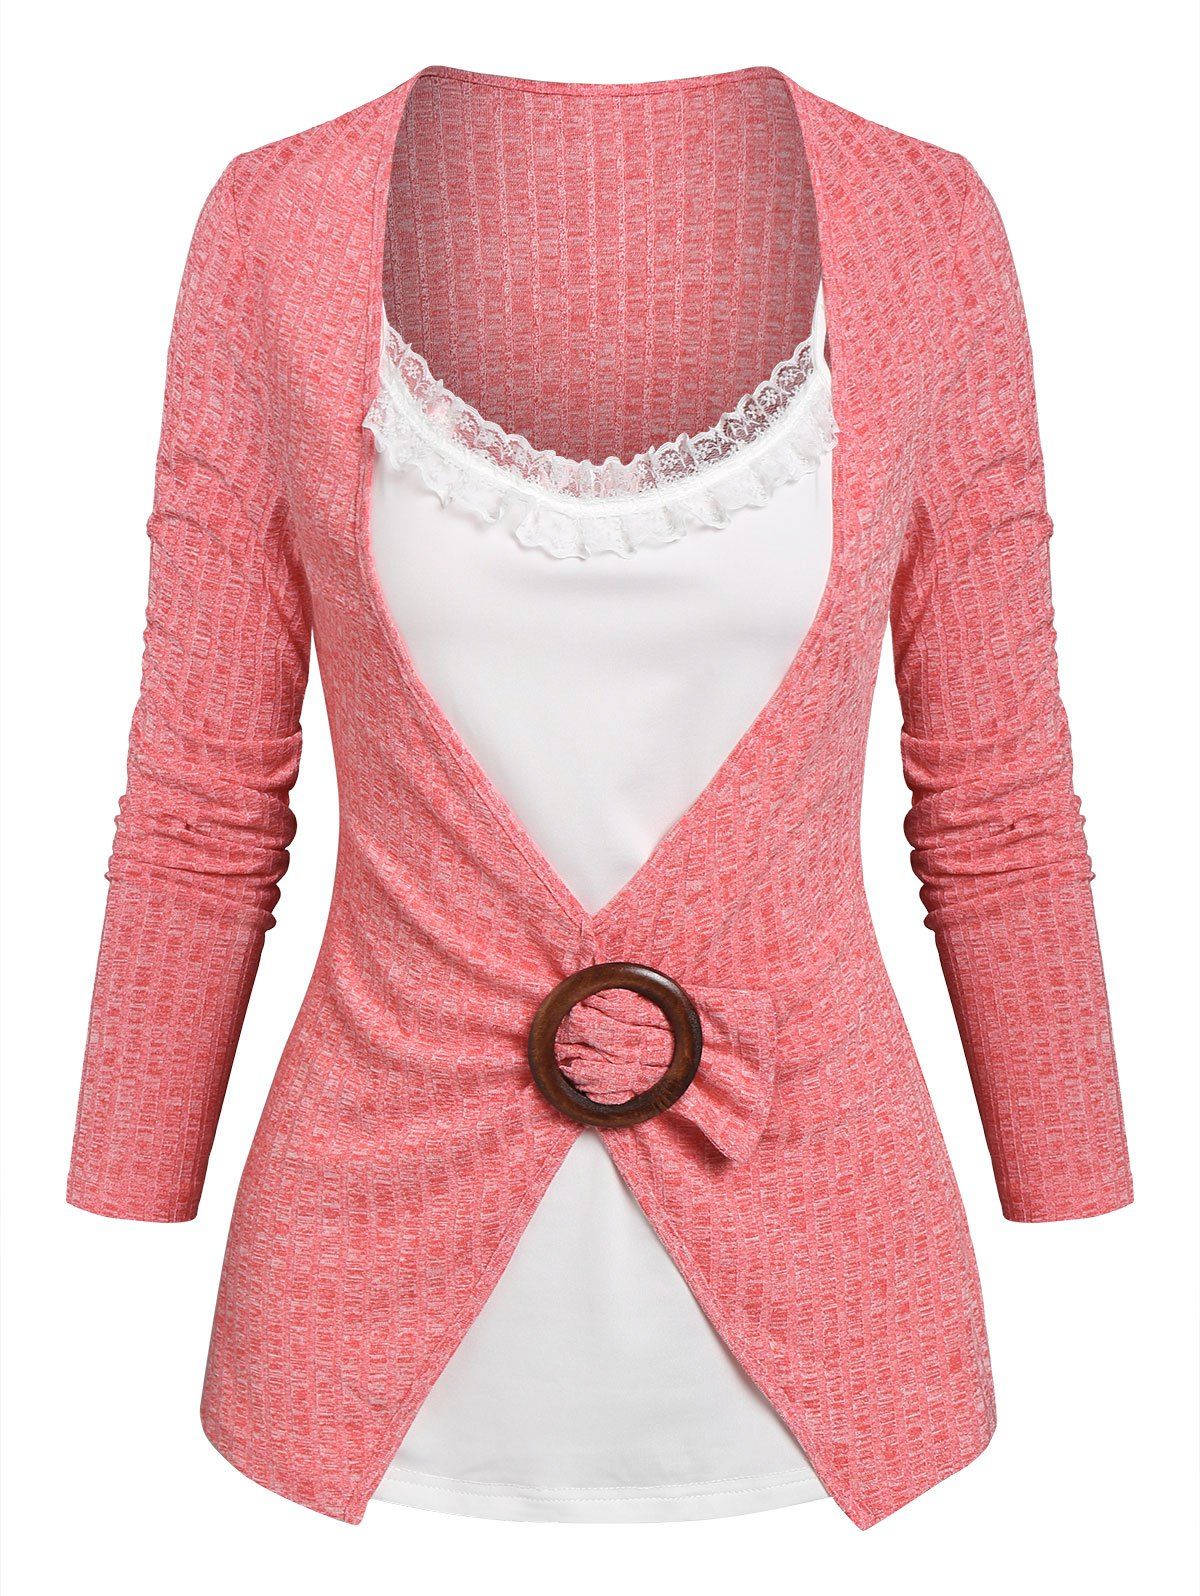 Lace Insert O-ring Ribbed Faux Twinset Knitwear - LIGHT PINK XXXL